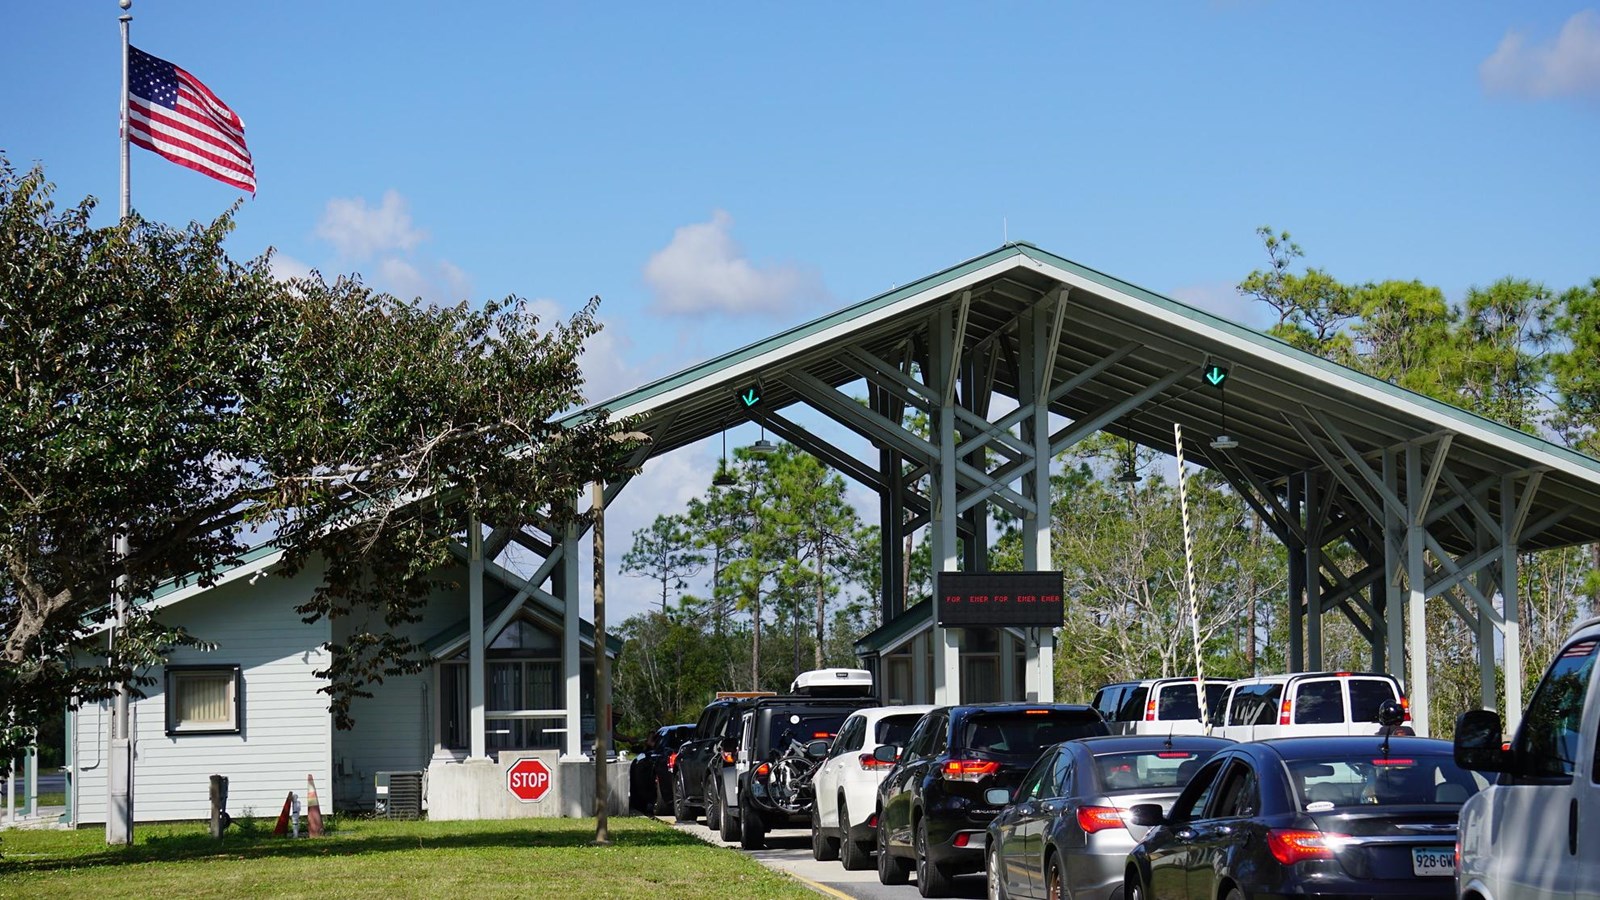 A line of cars waiting to enter through a gray open aired structure with a slanted roof